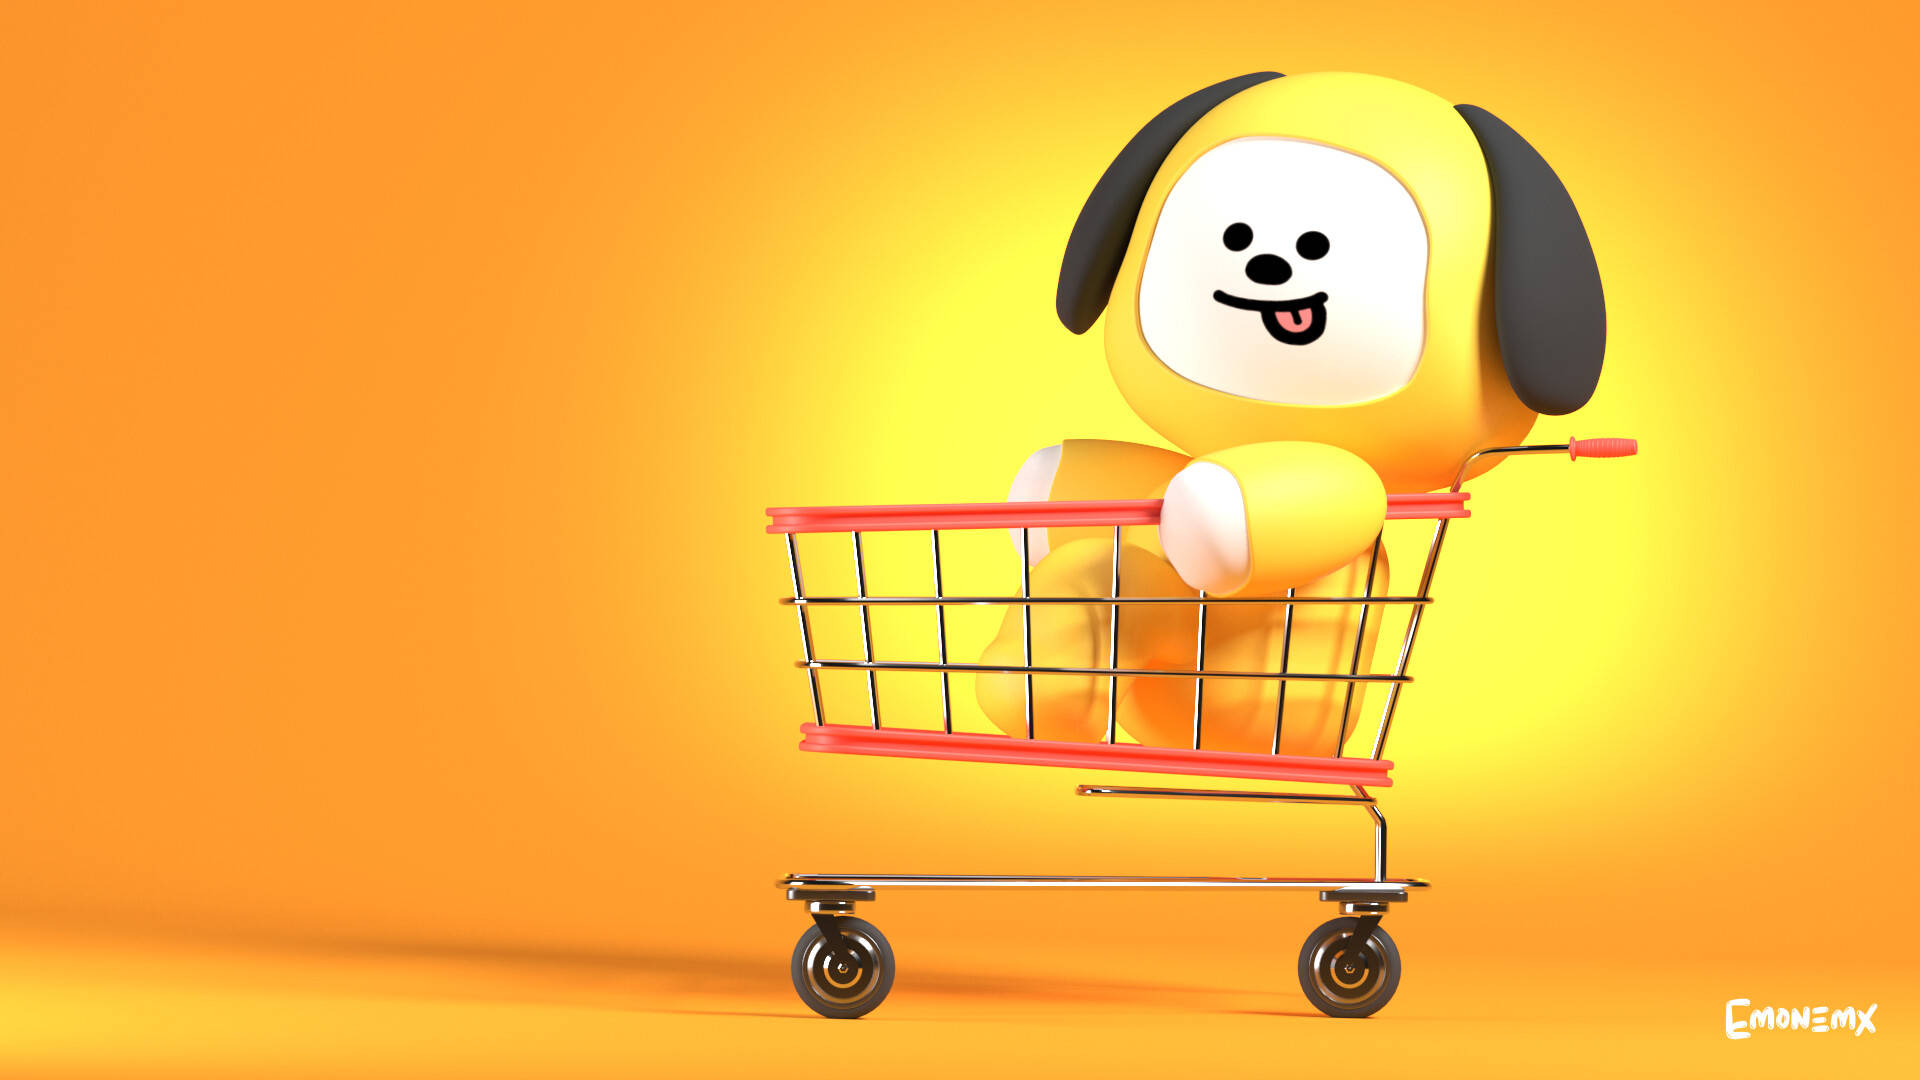 Adorable Chimmy Bt21 In A Playful Mood! Wallpaper